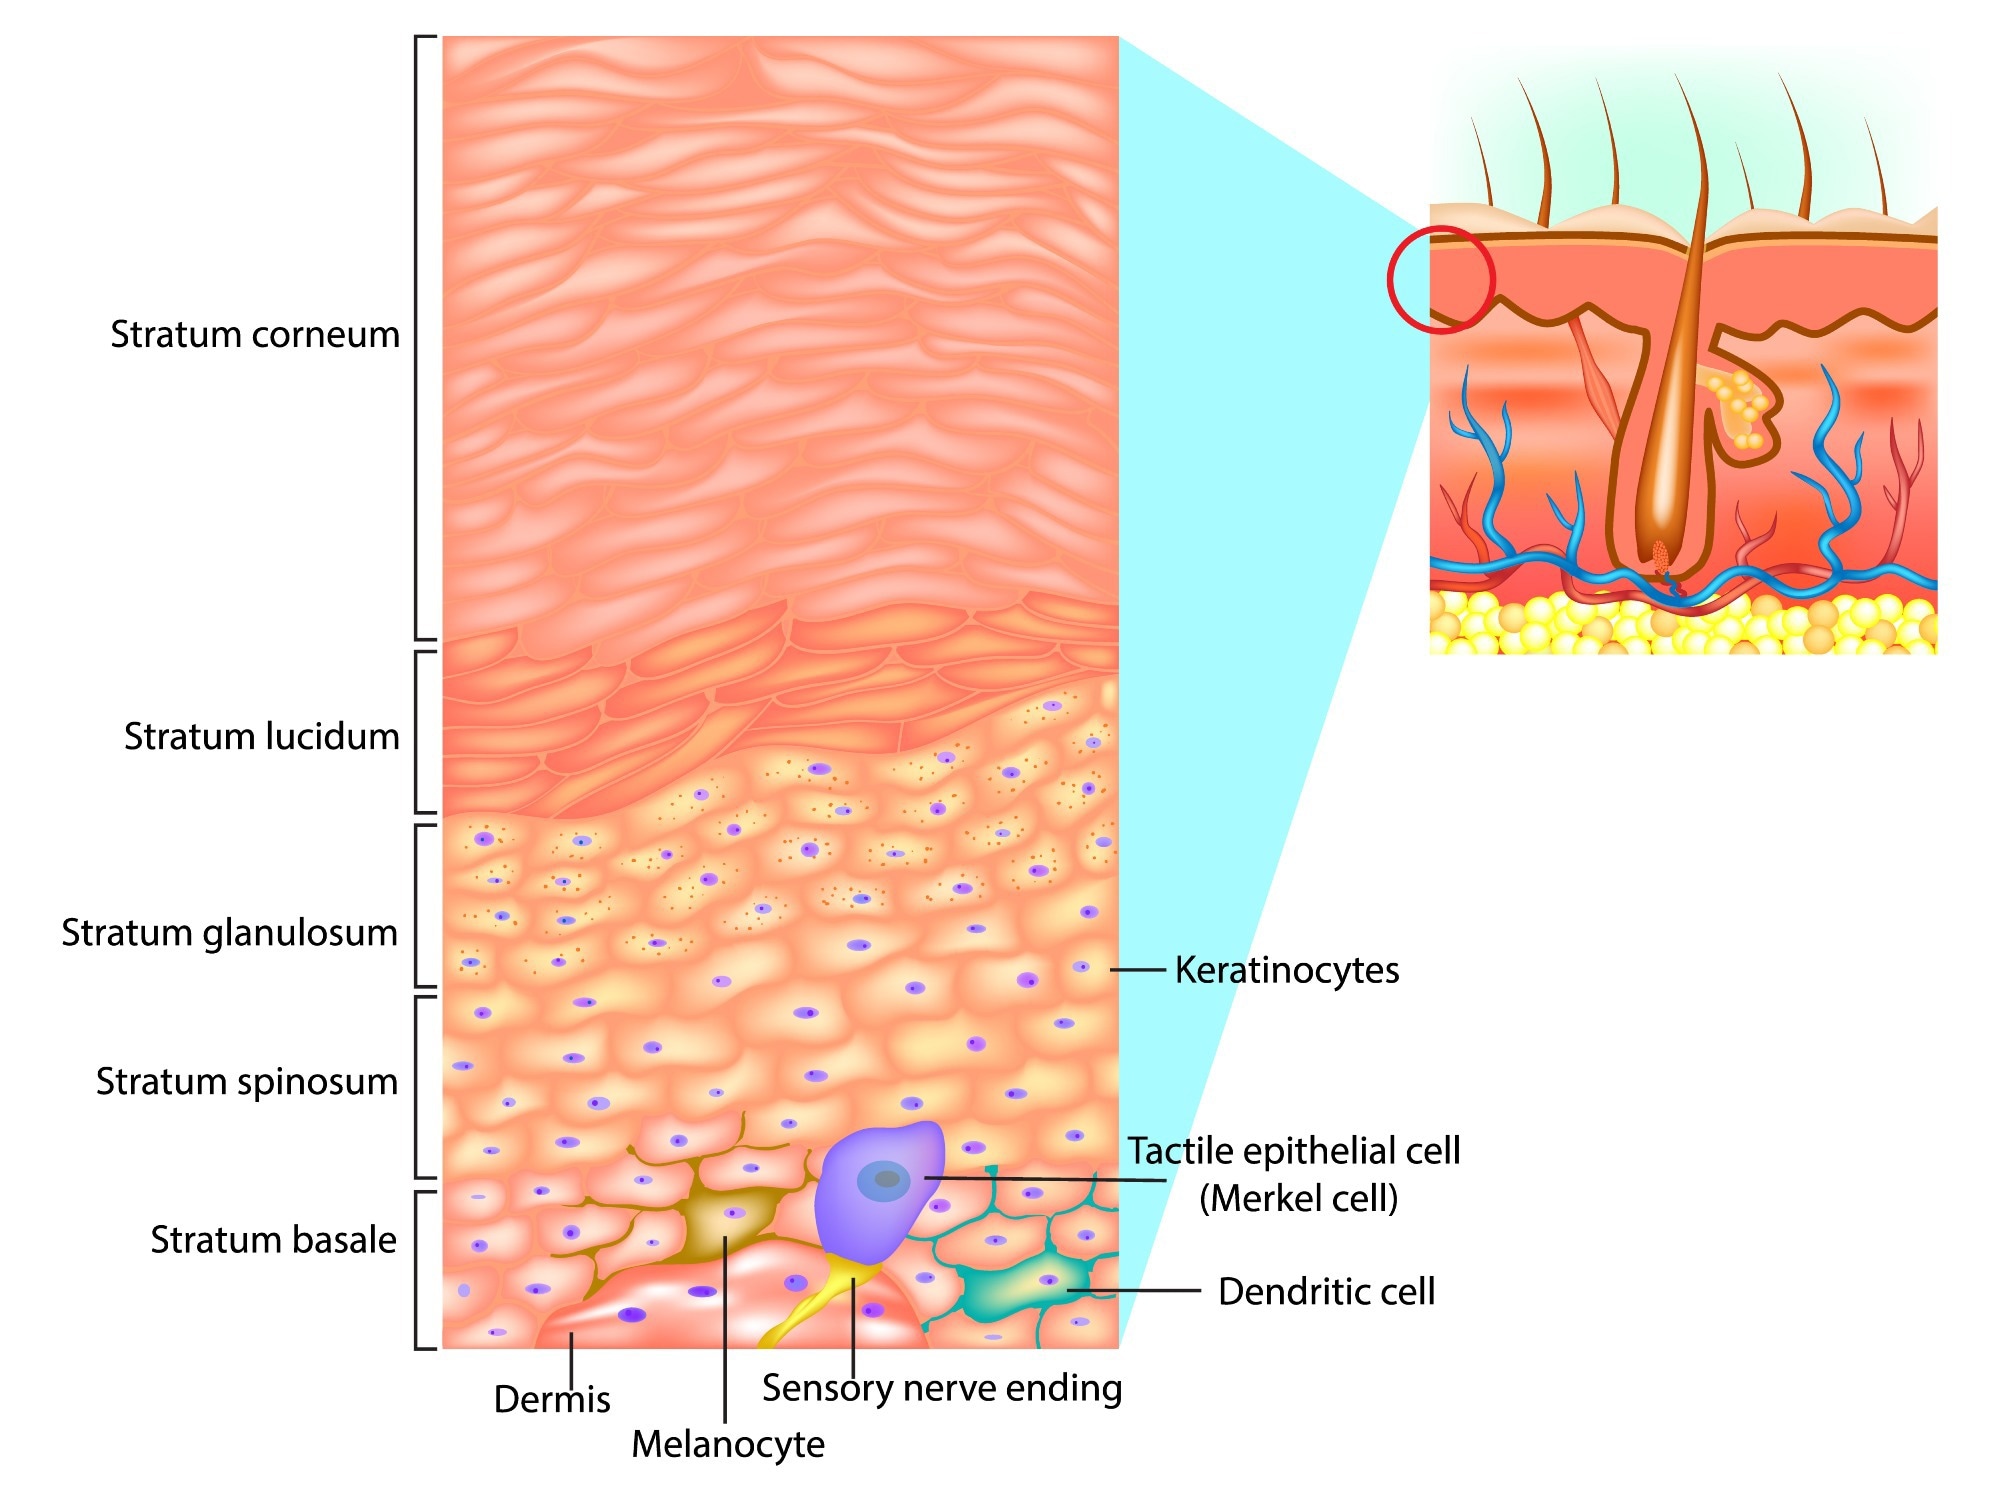 Cells of the epidermis and epidermal layers. The diagram depicts a cross-sectional view of the epidermis.​​​​​​​ Image Credit: Sakurra / Shutterstock.com